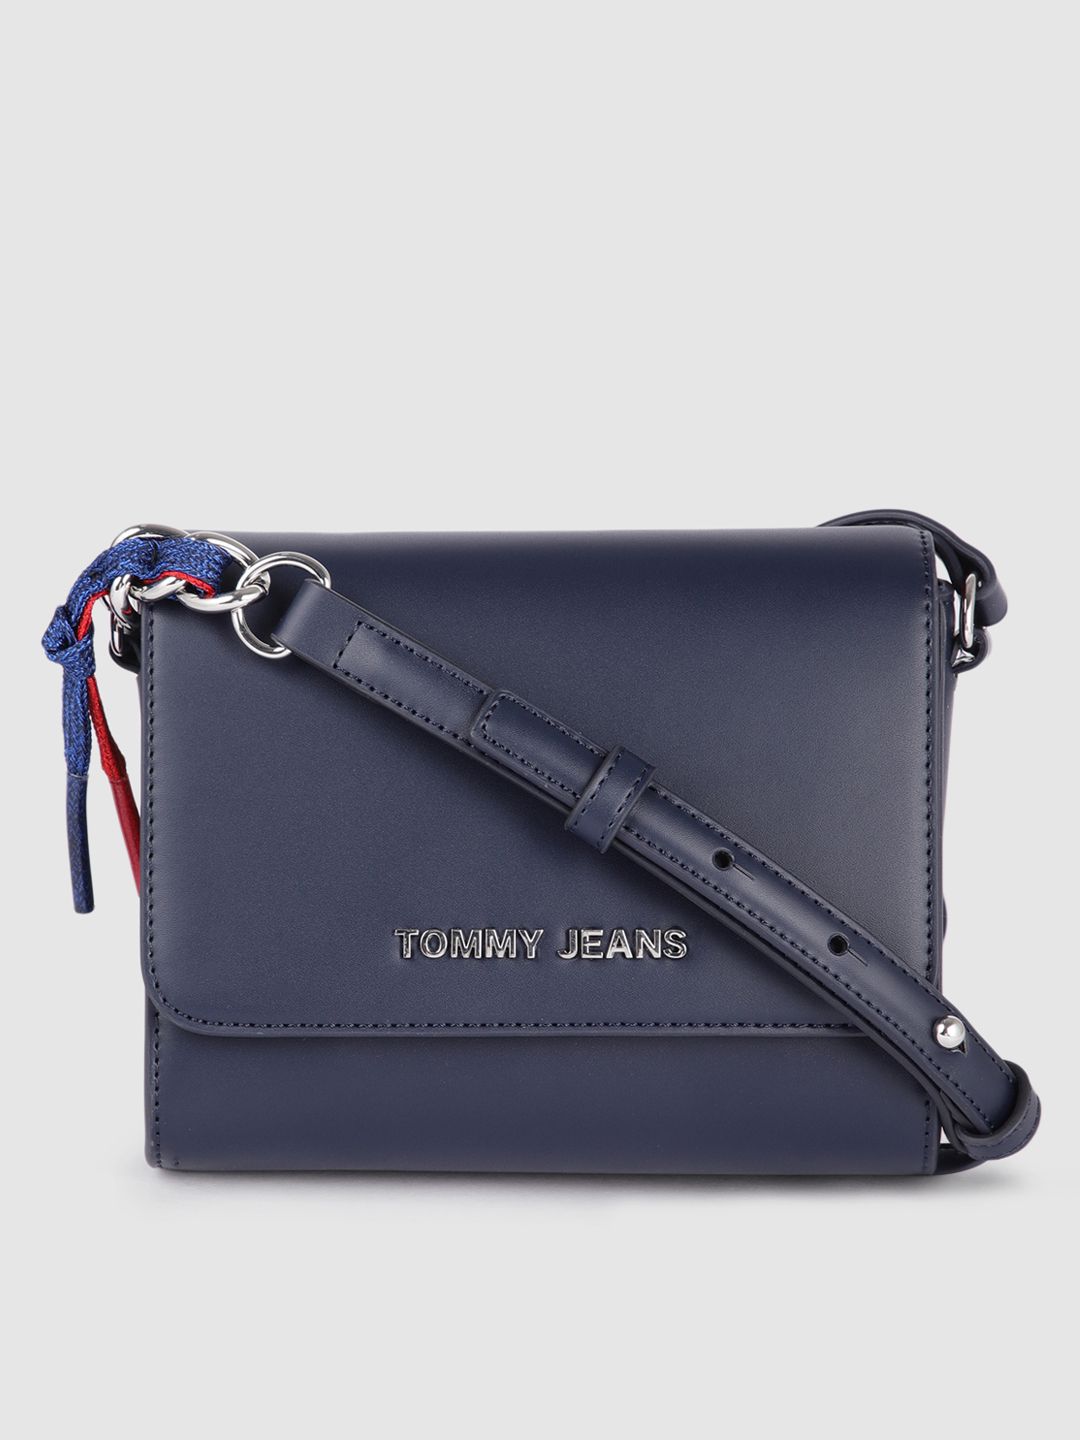 Tommy Hilfiger Twilight Navy Blue PU Regular Structured Crossover Sling Bag with Tassel Price in India